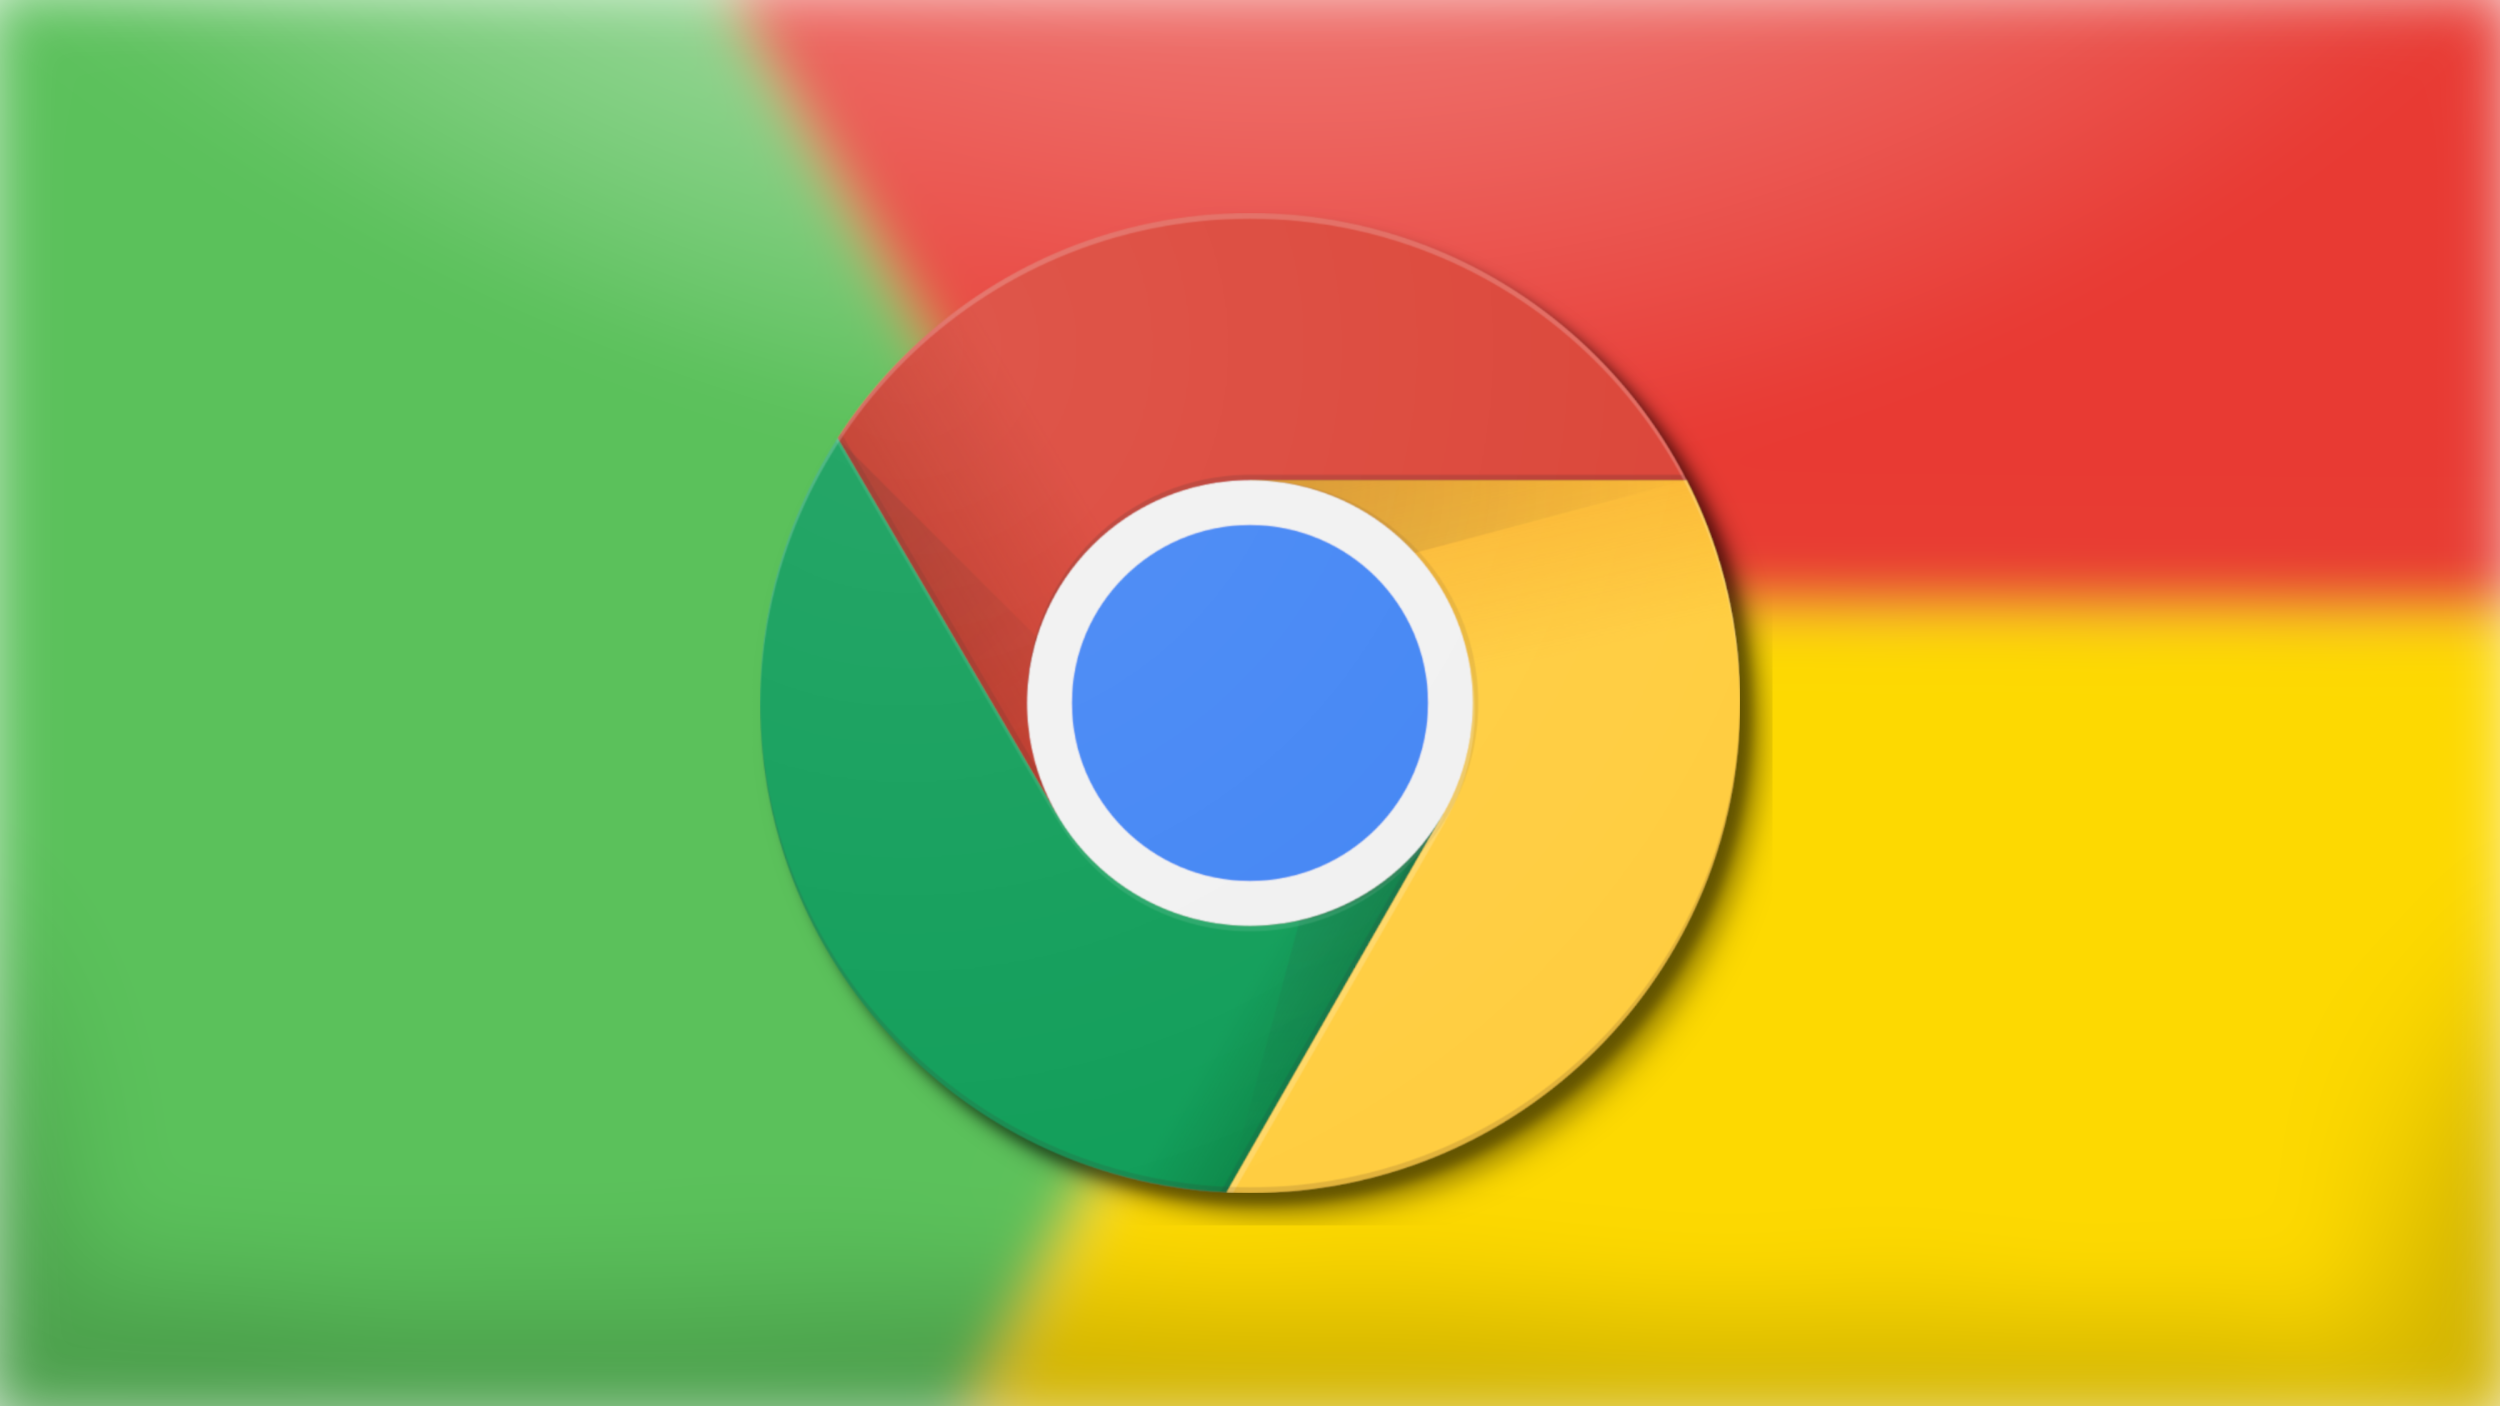 Google releases Chrome 110, parts ways with Windows 7